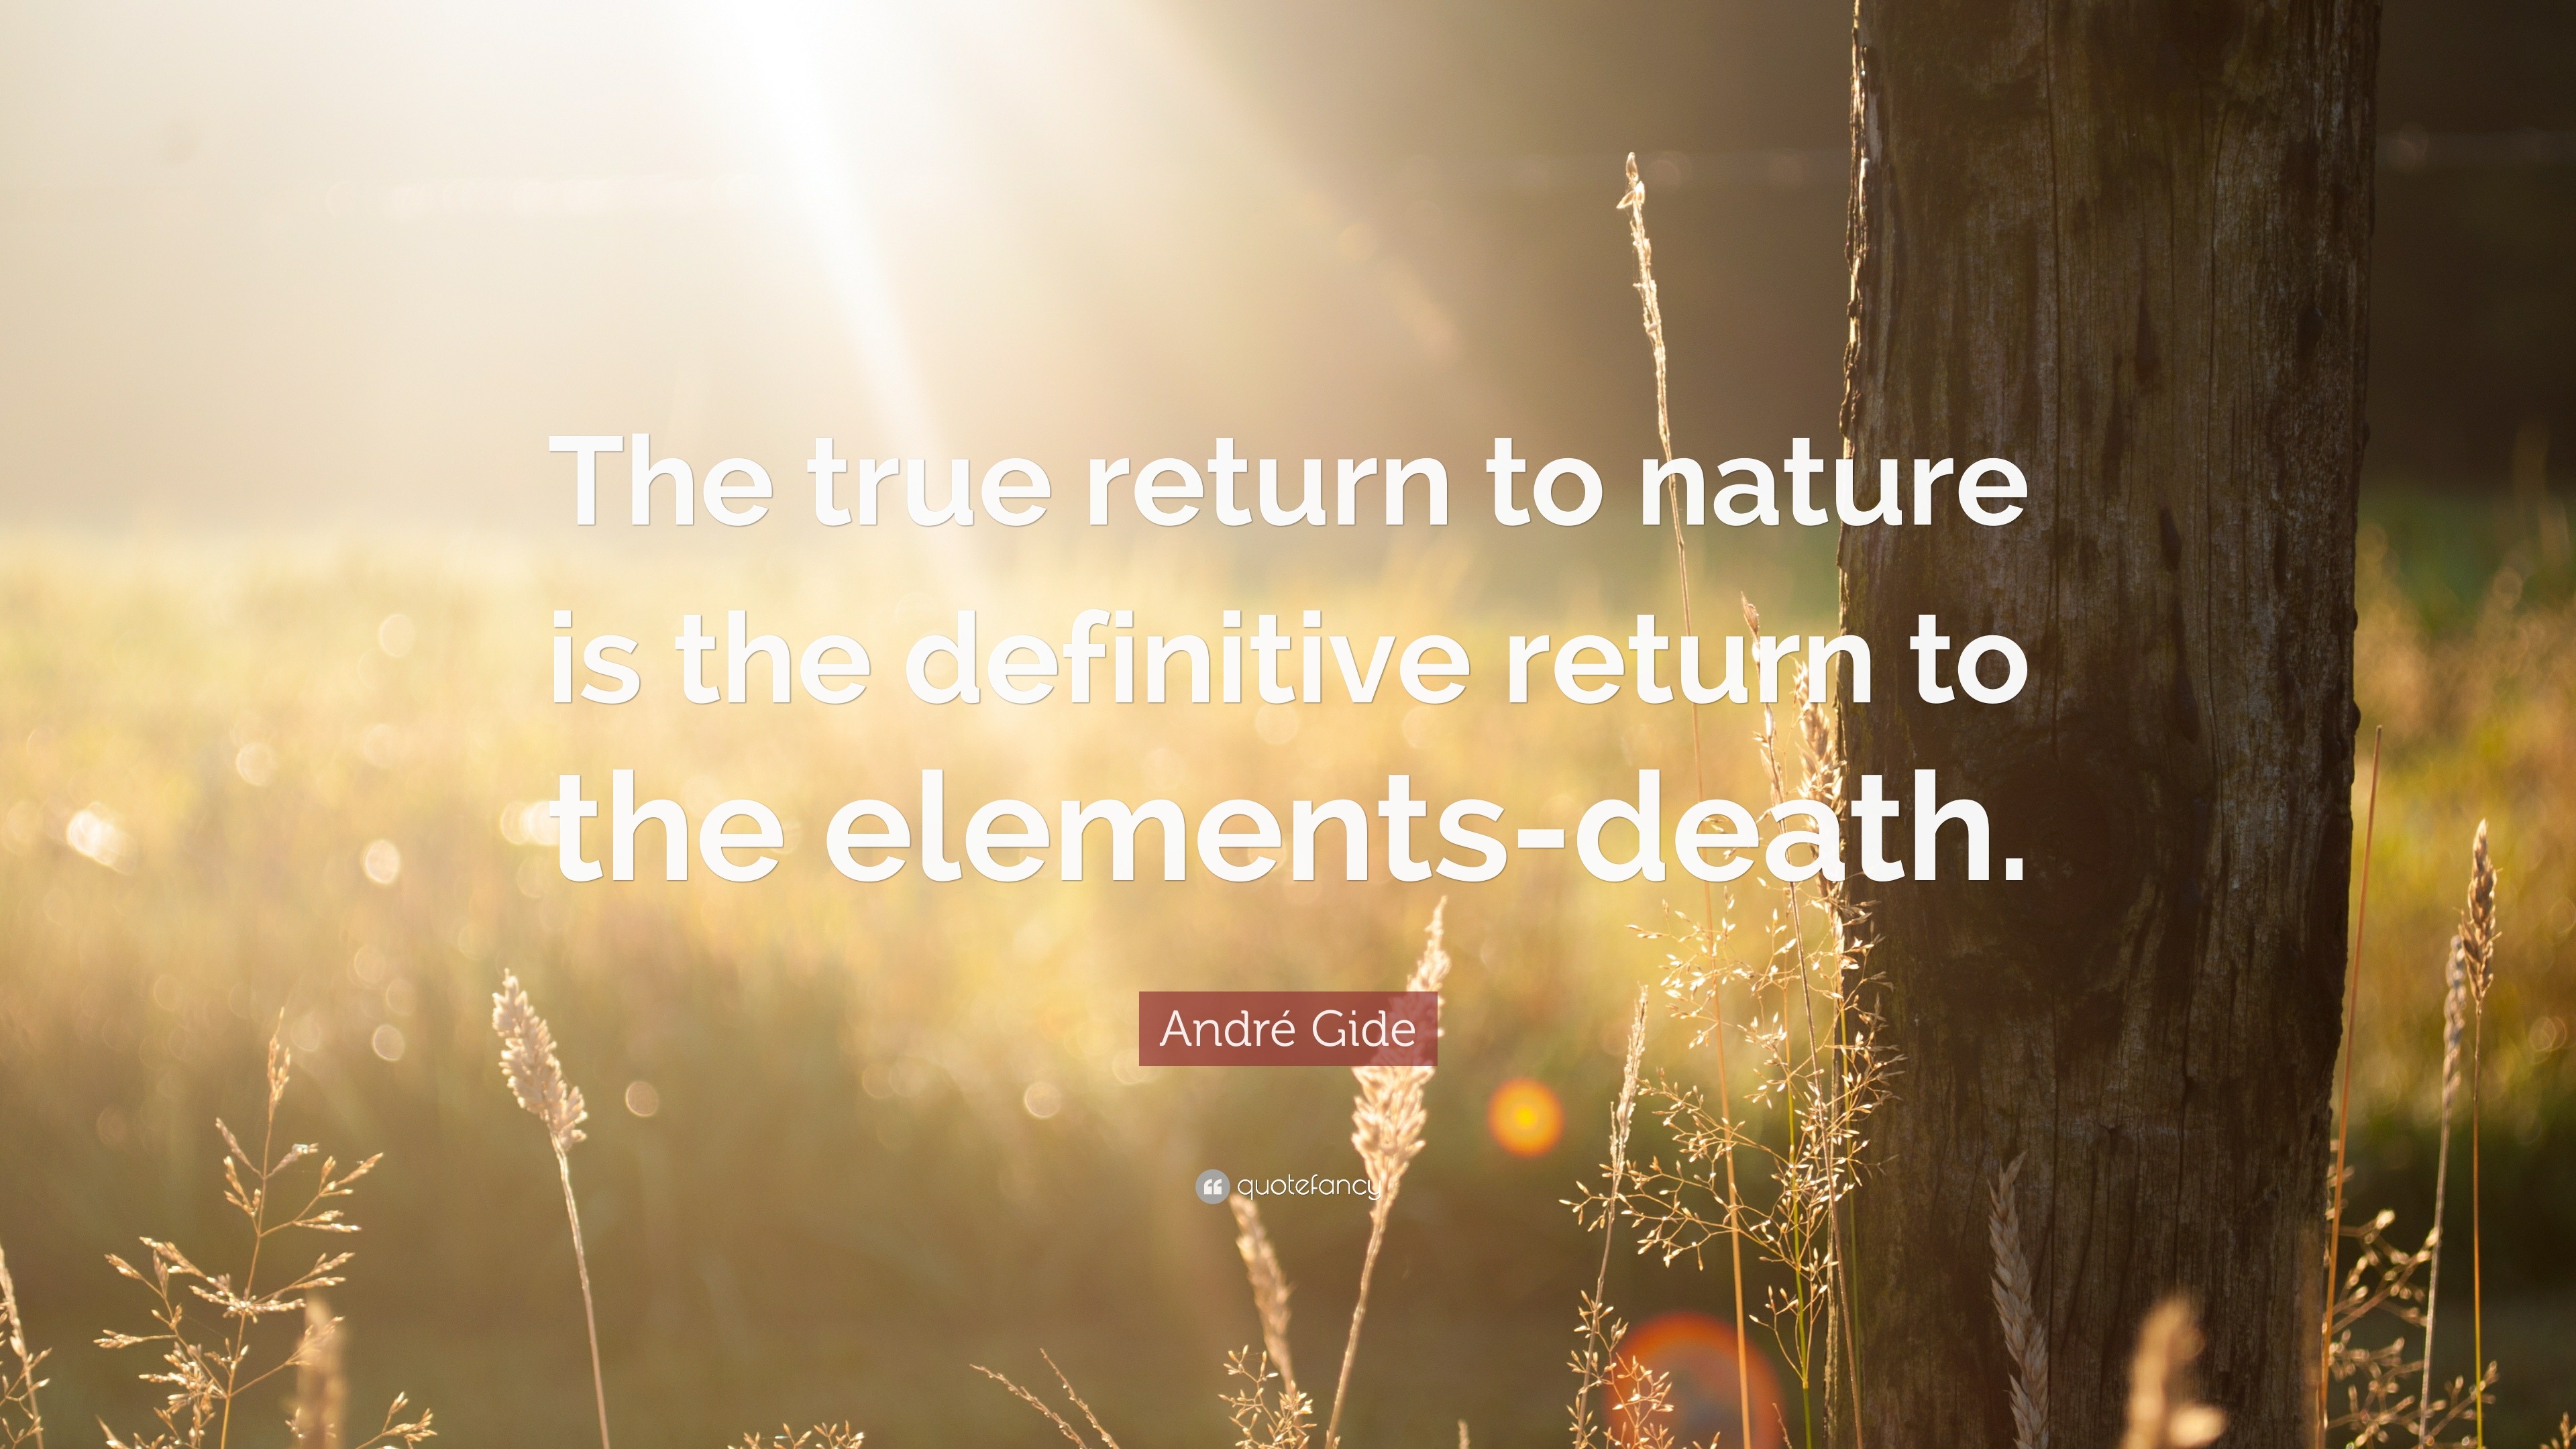 Derfra buffet Pump André Gide Quote: “The true return to nature is the definitive return to  the elements-death.”